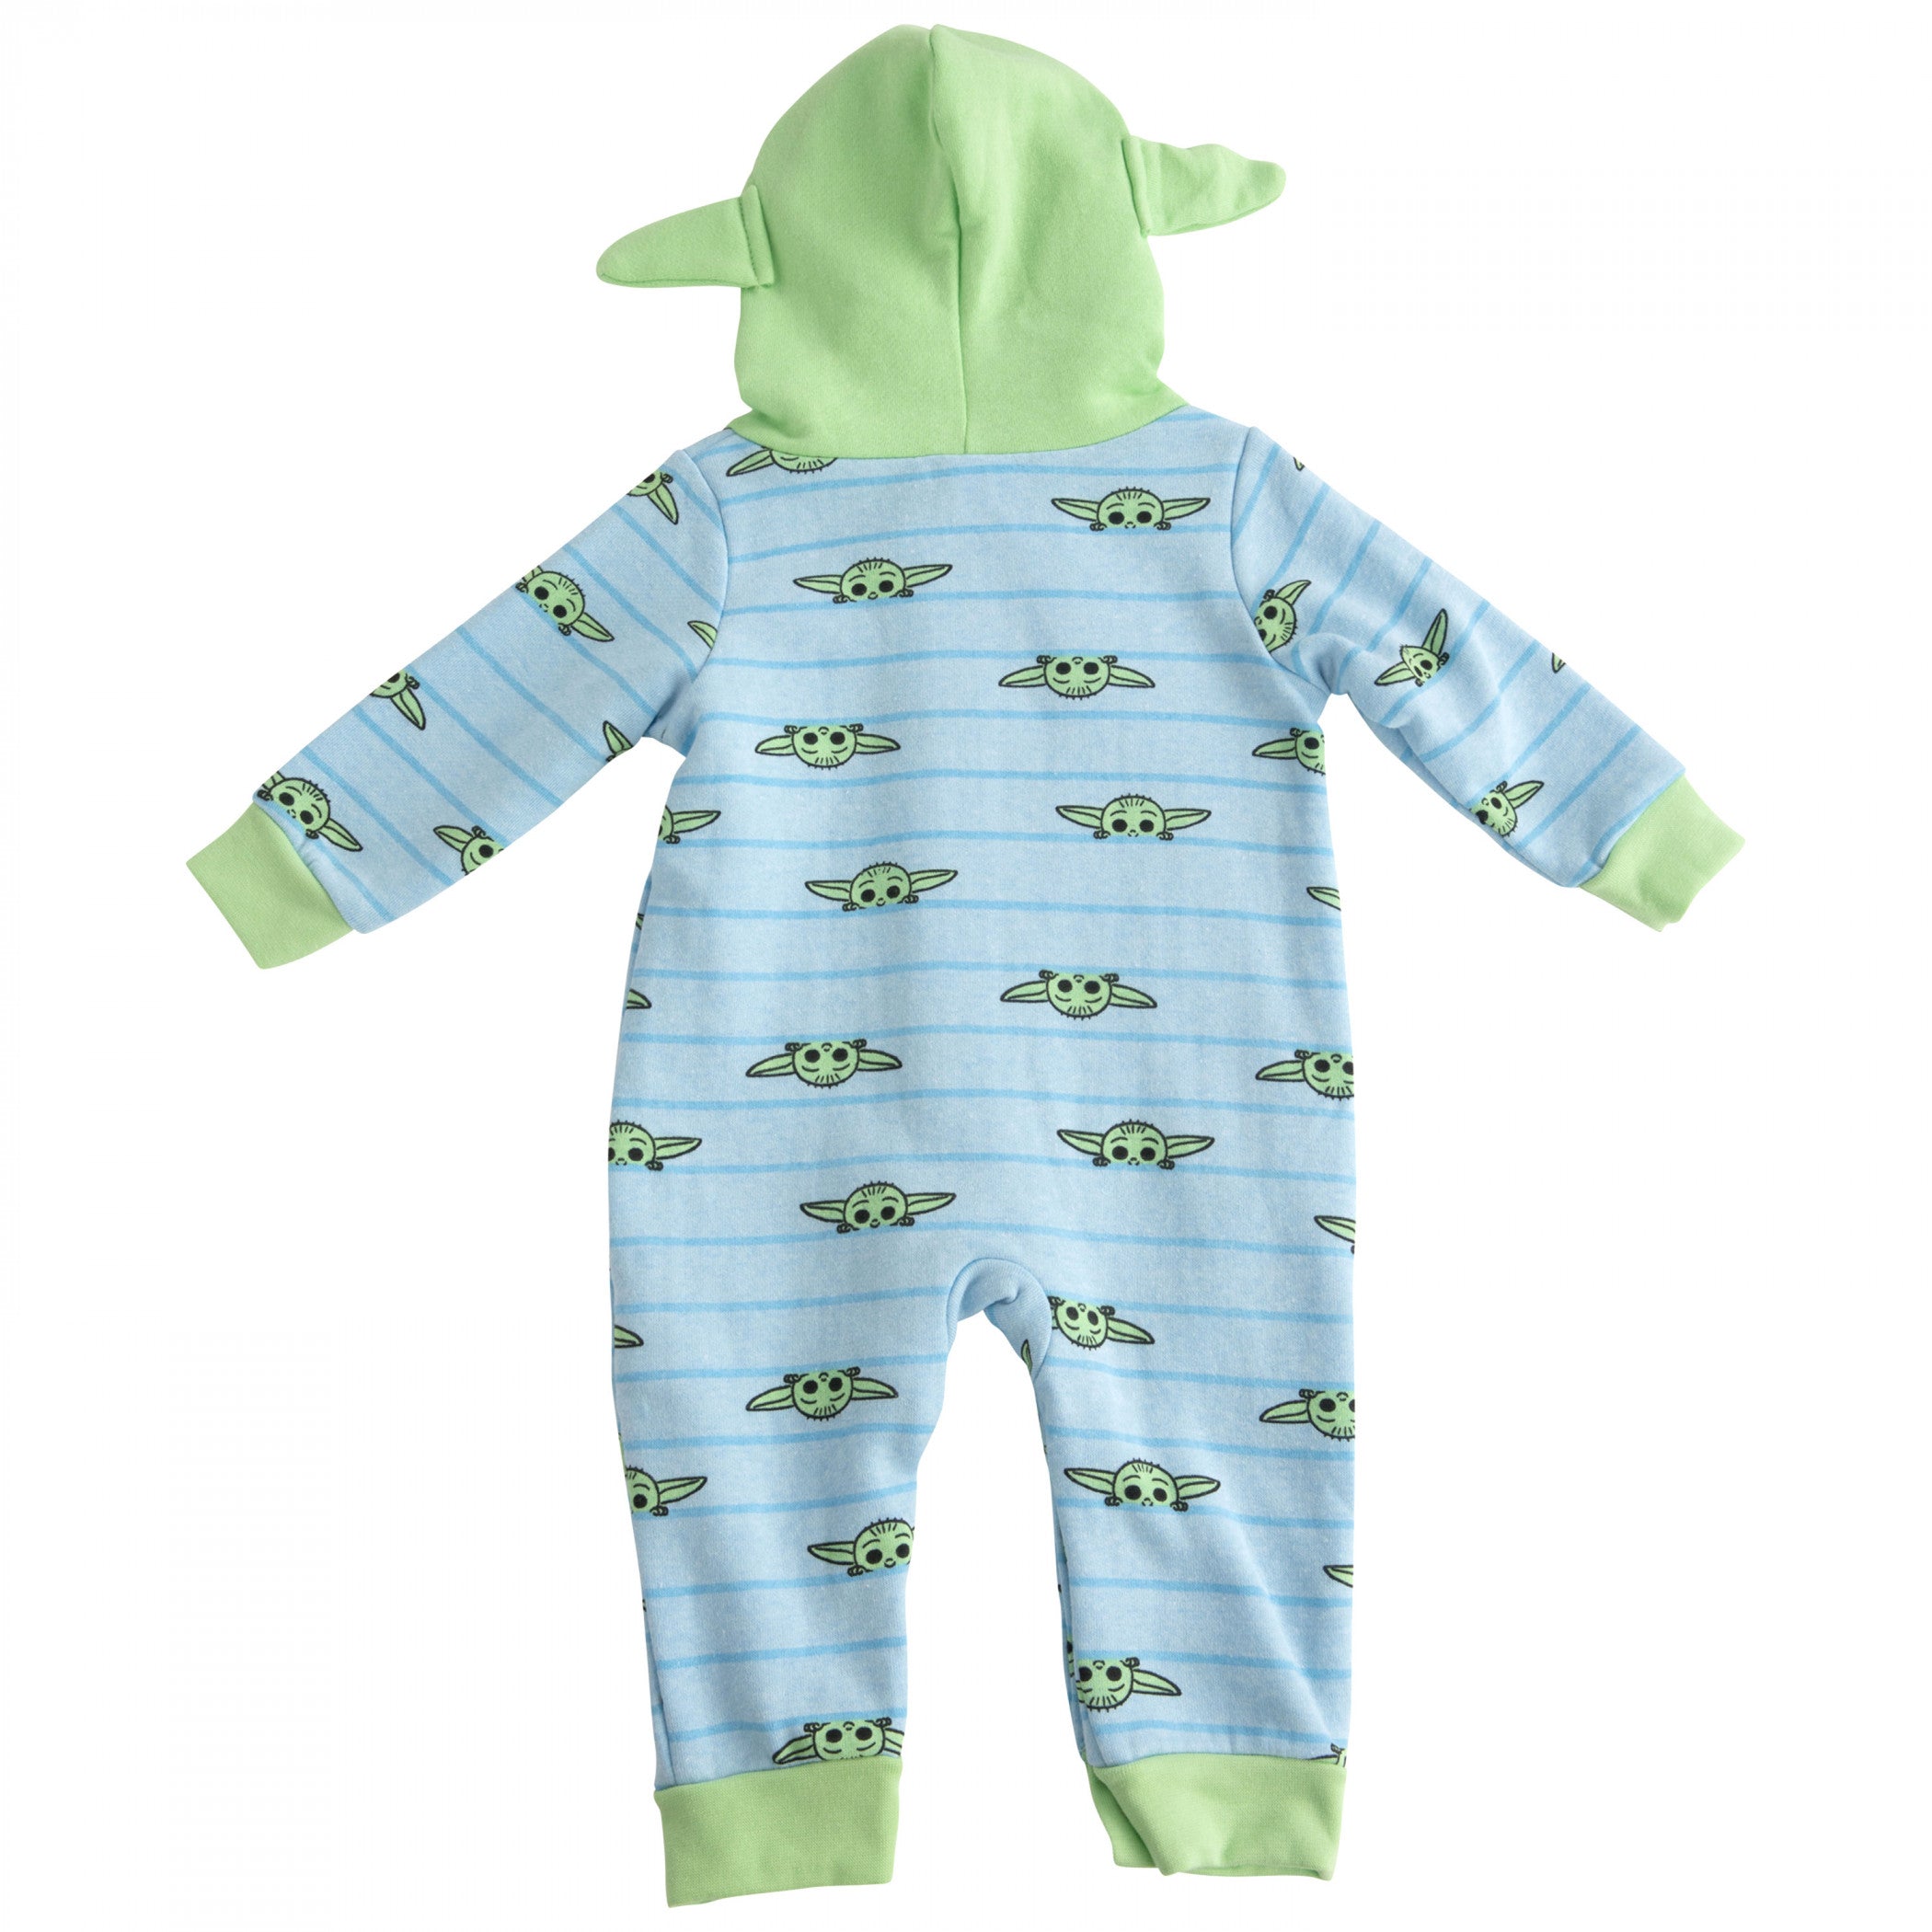 title:Star Wars Grogu Infant Hooded Fleece Coveralls with Ears;color:Multi-Color